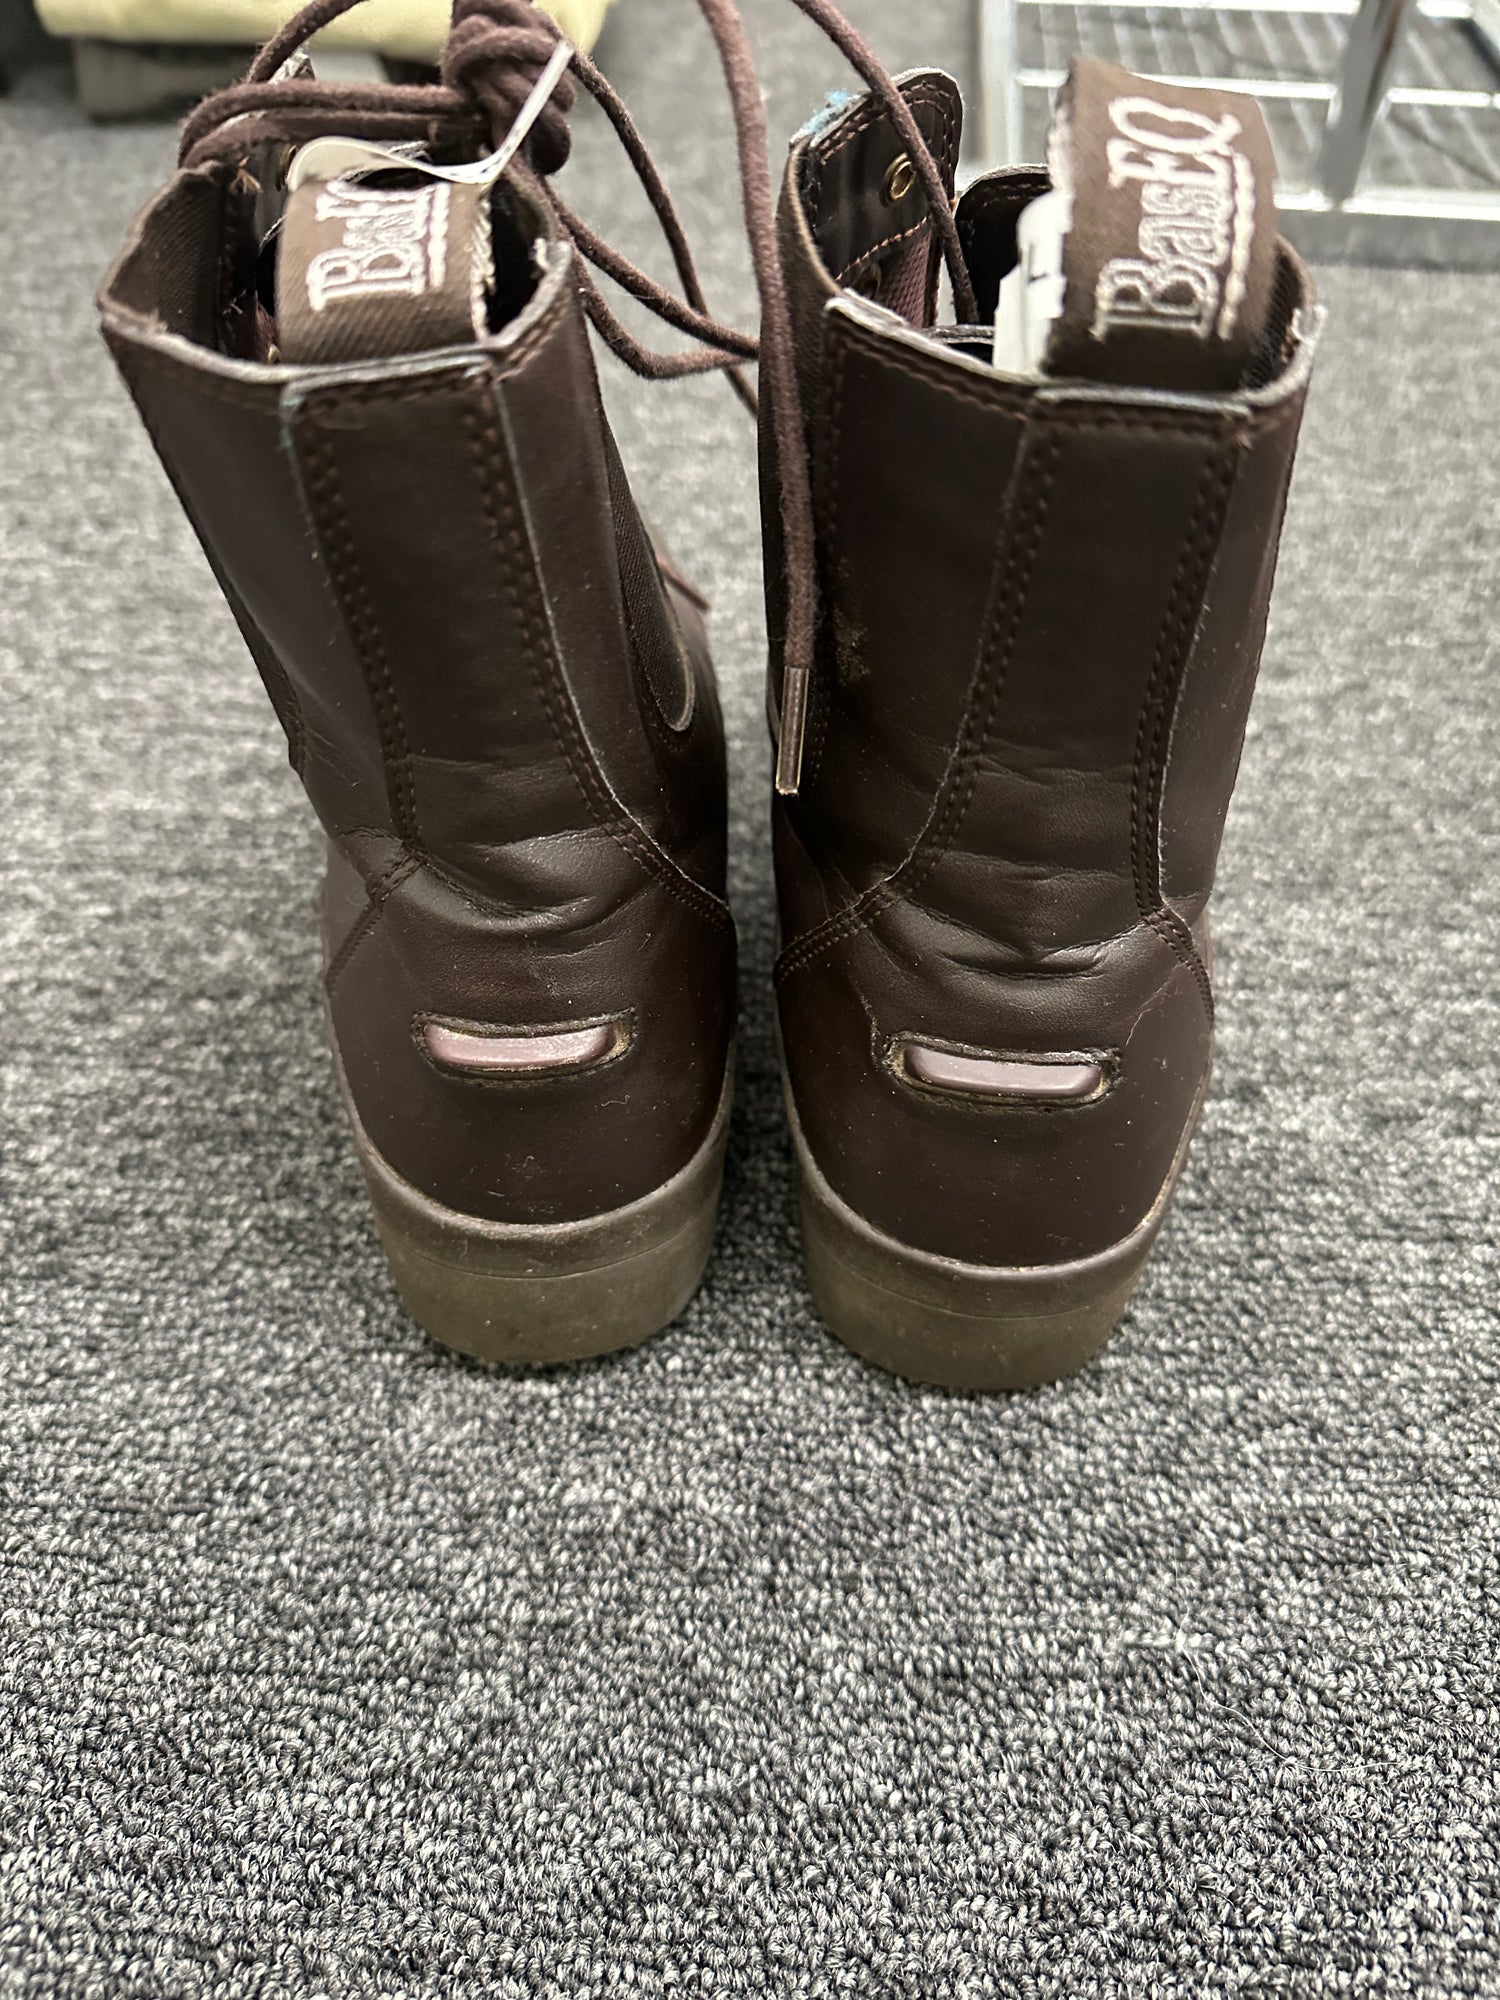 Women's Paddock Boots Size 8 Ovation Brown